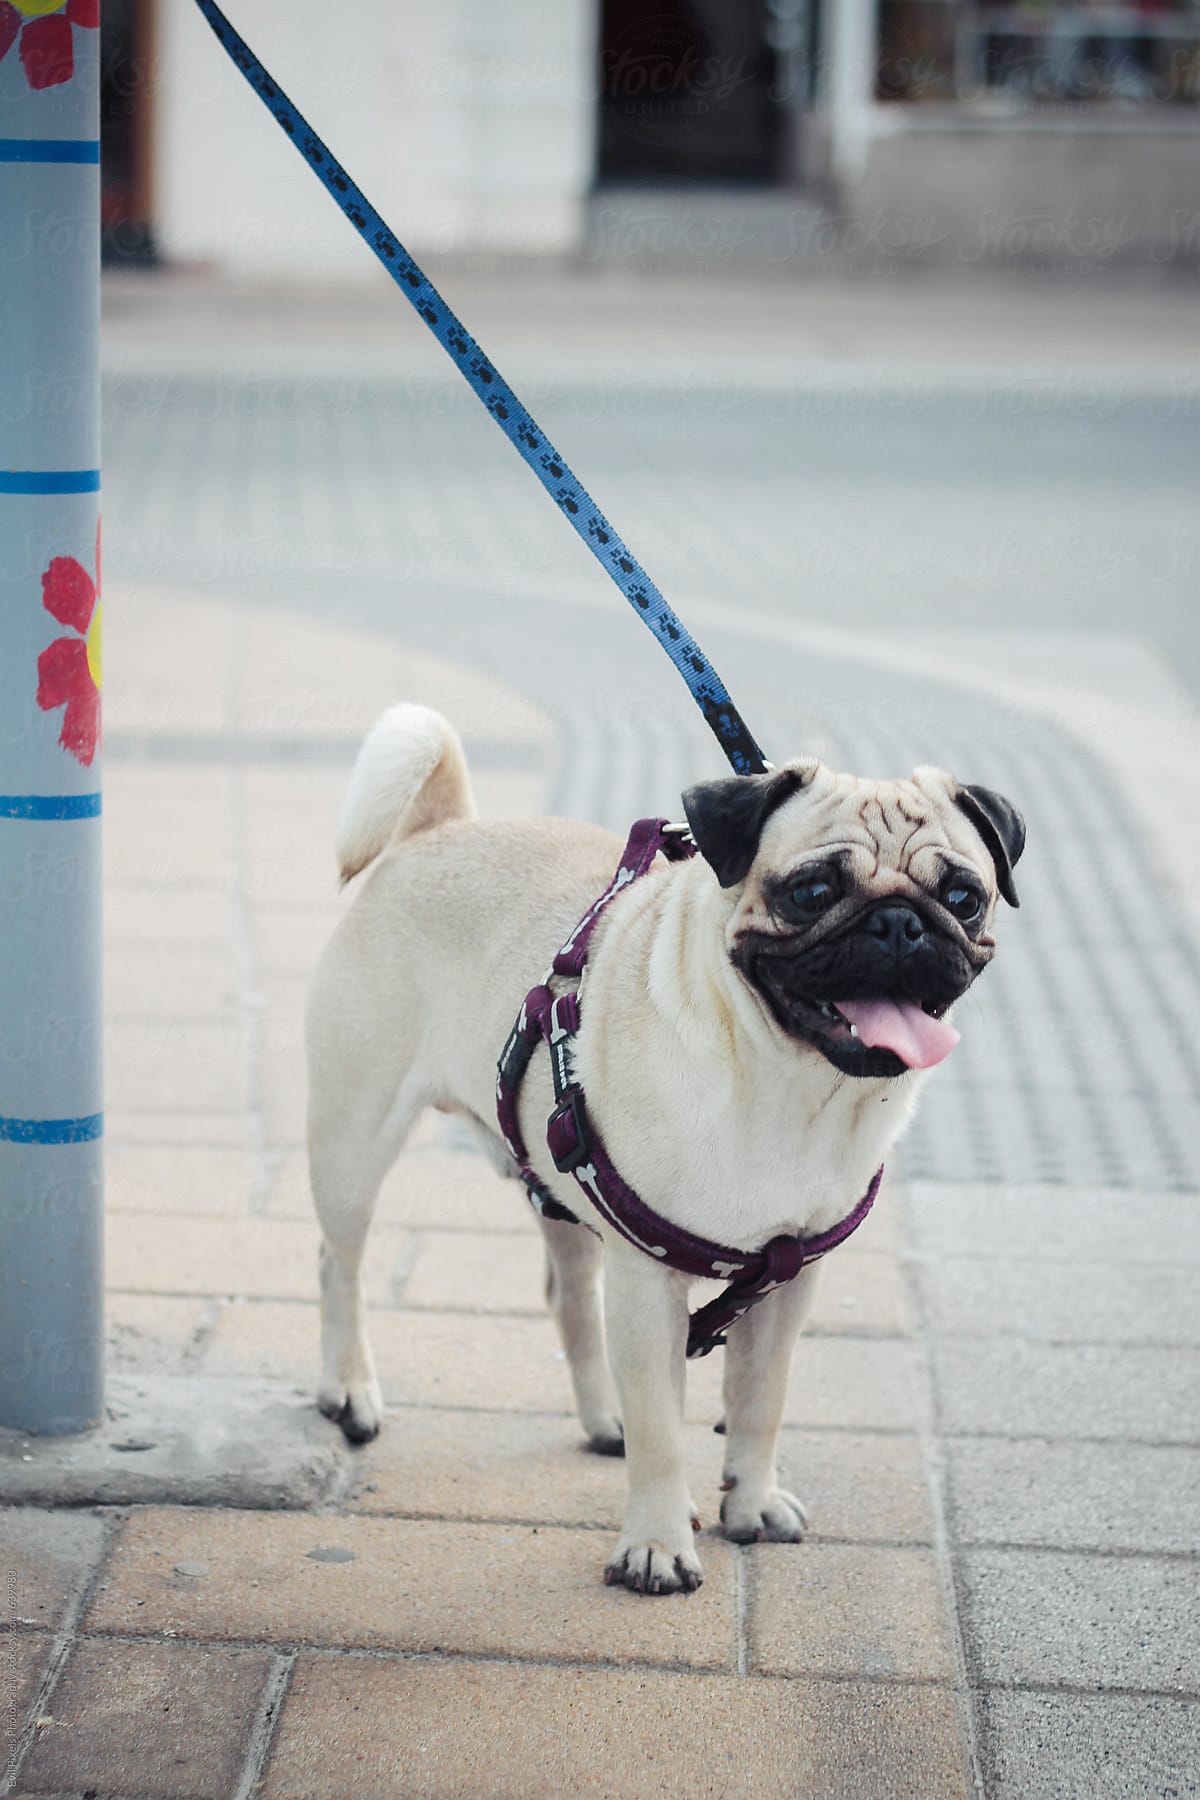 Dog On A Leash In The Street